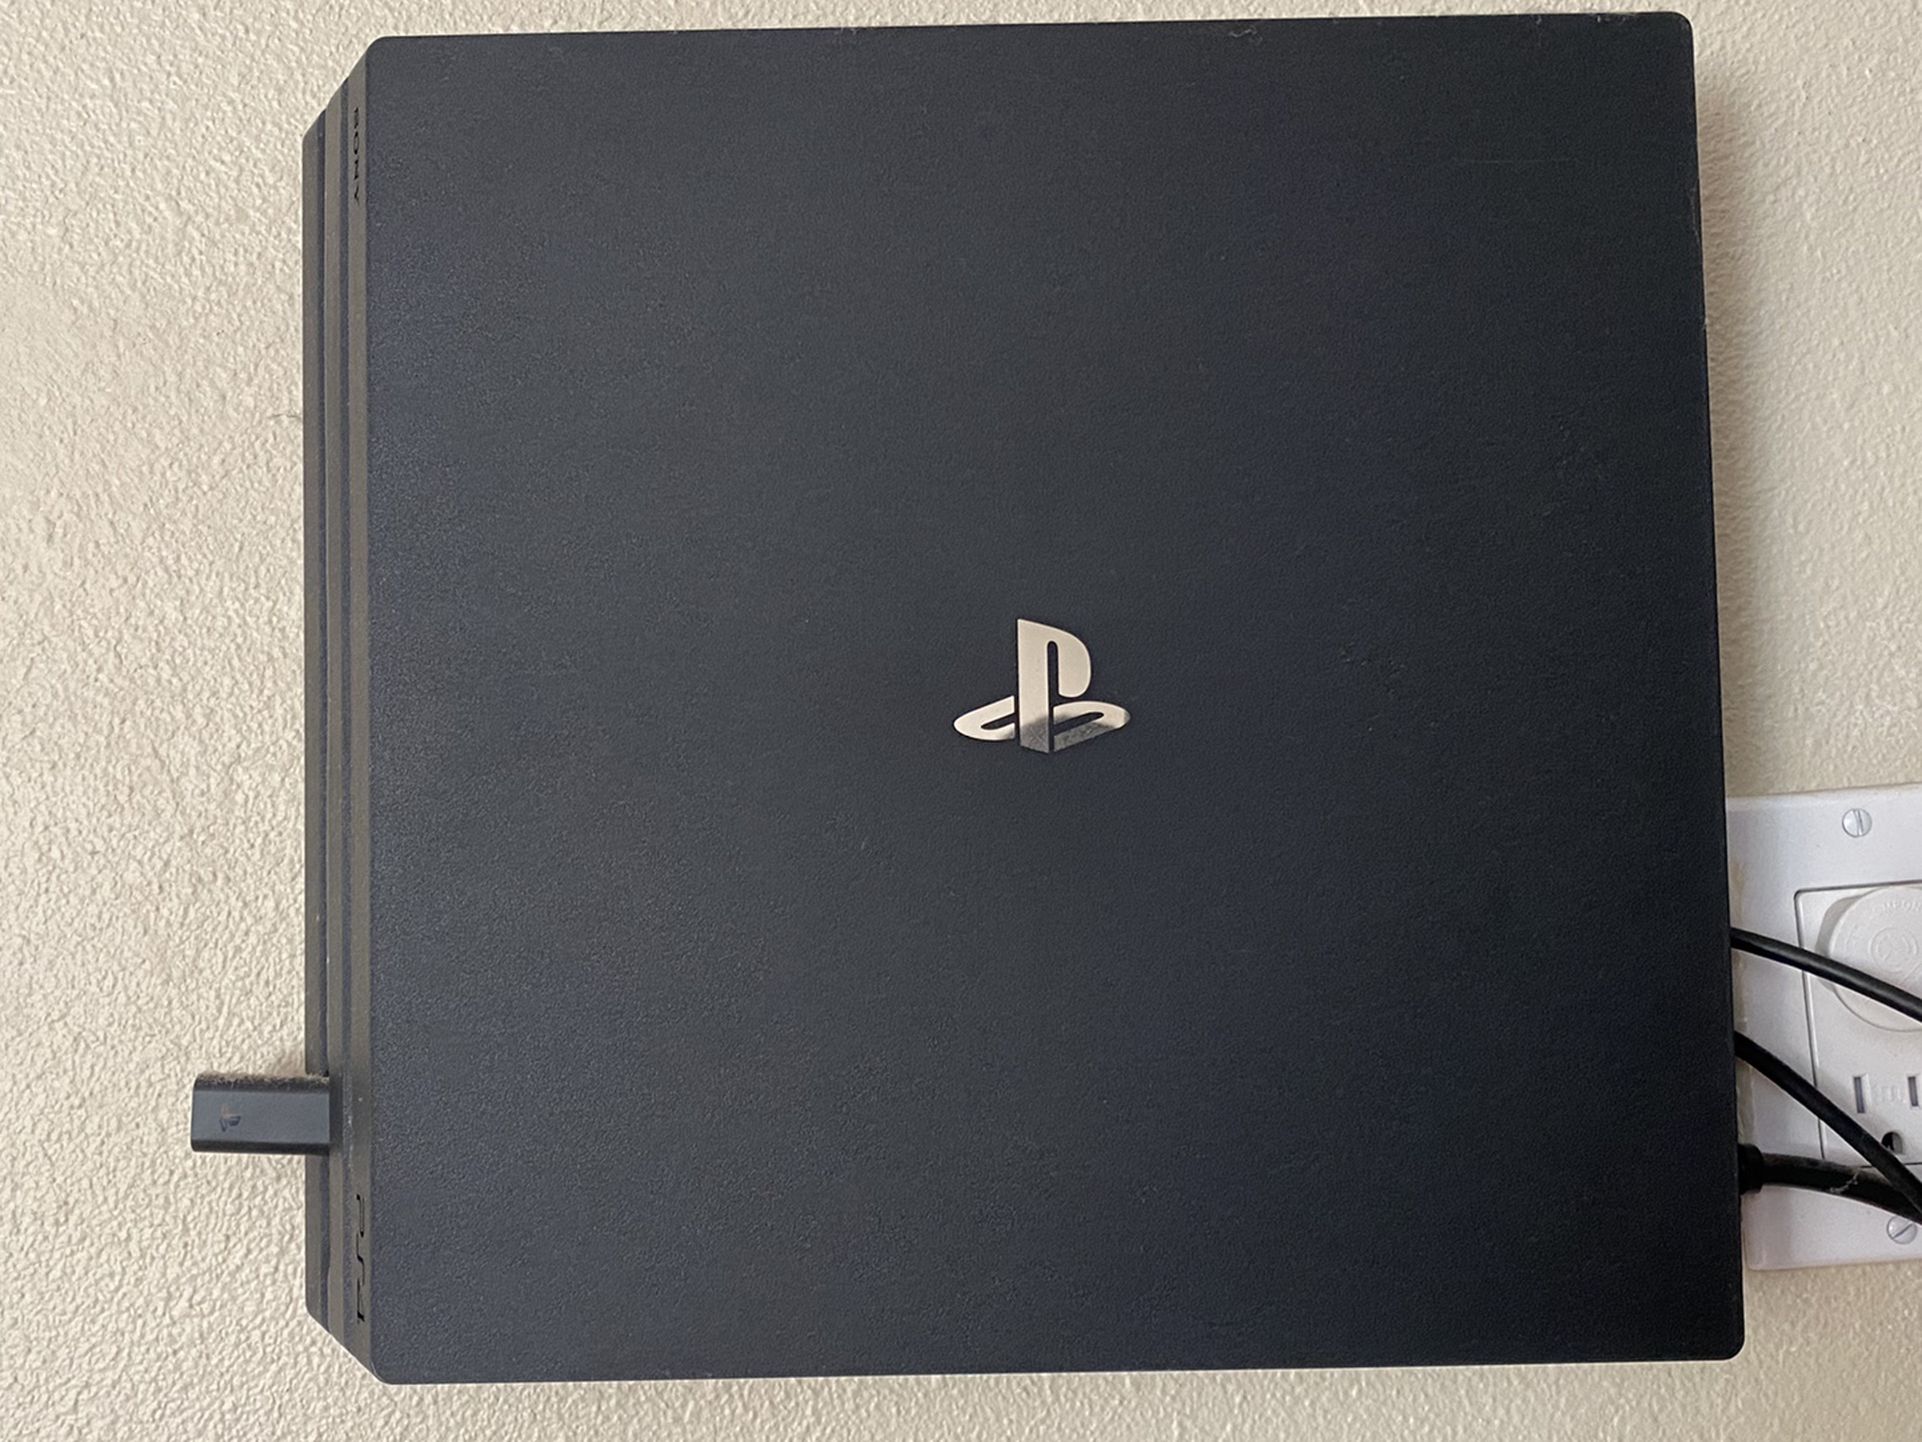 PS4 Pro with HIDEit Mount Eye Camera and Gold Wireless Headphones